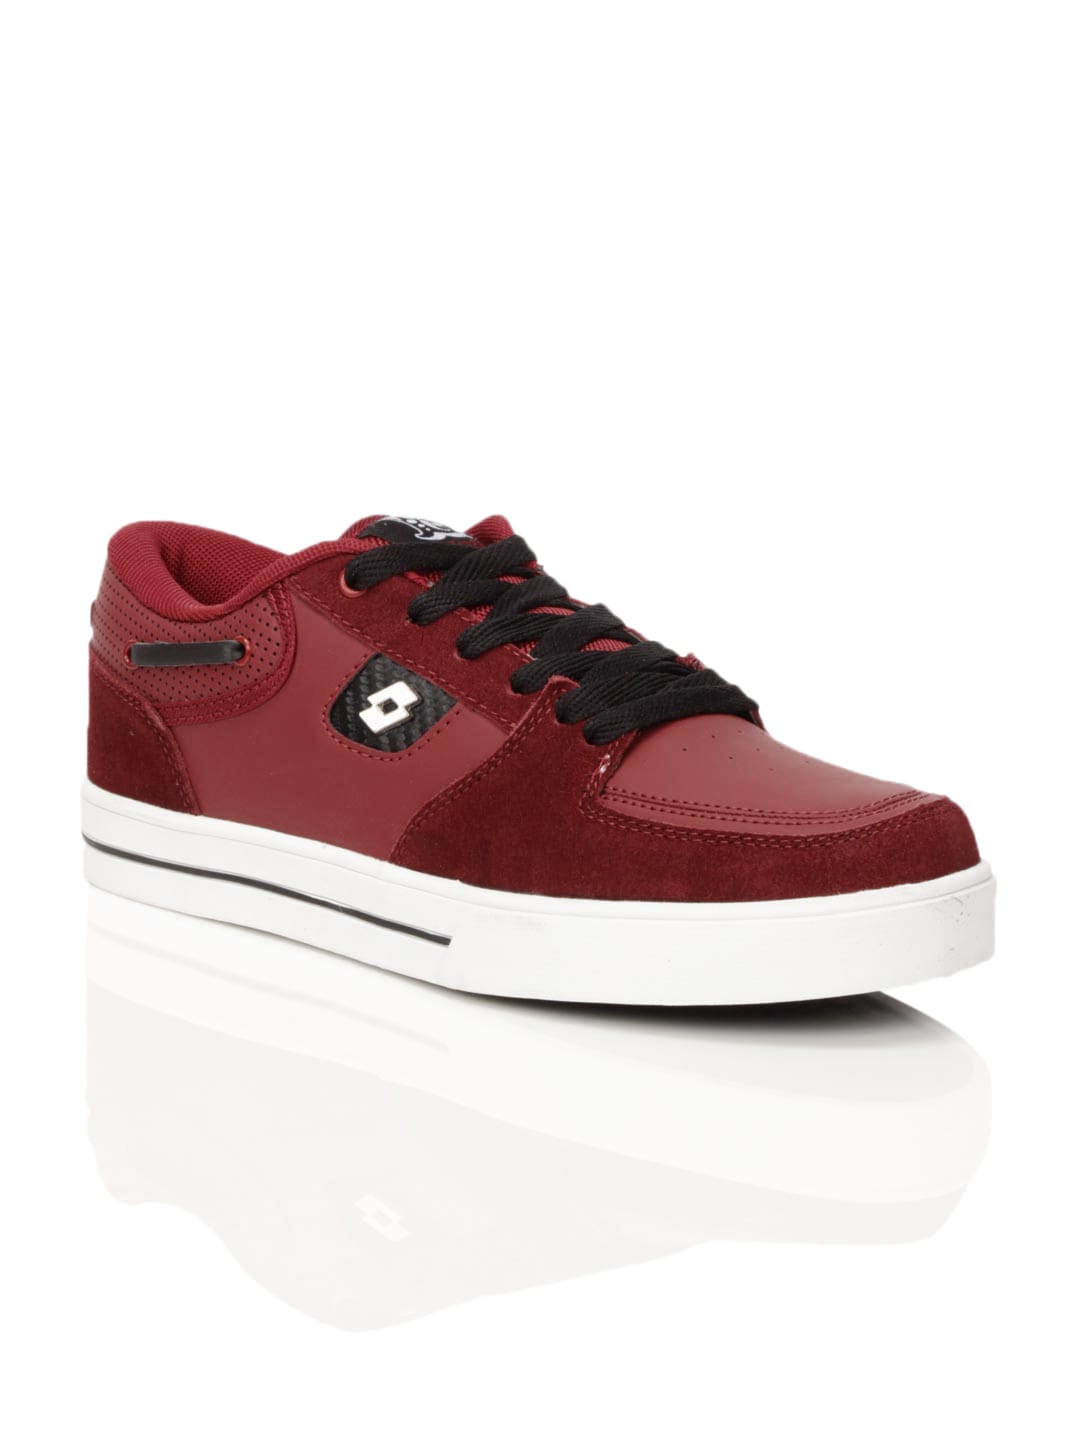 Lotto Men Sneak Red Casual Shoes